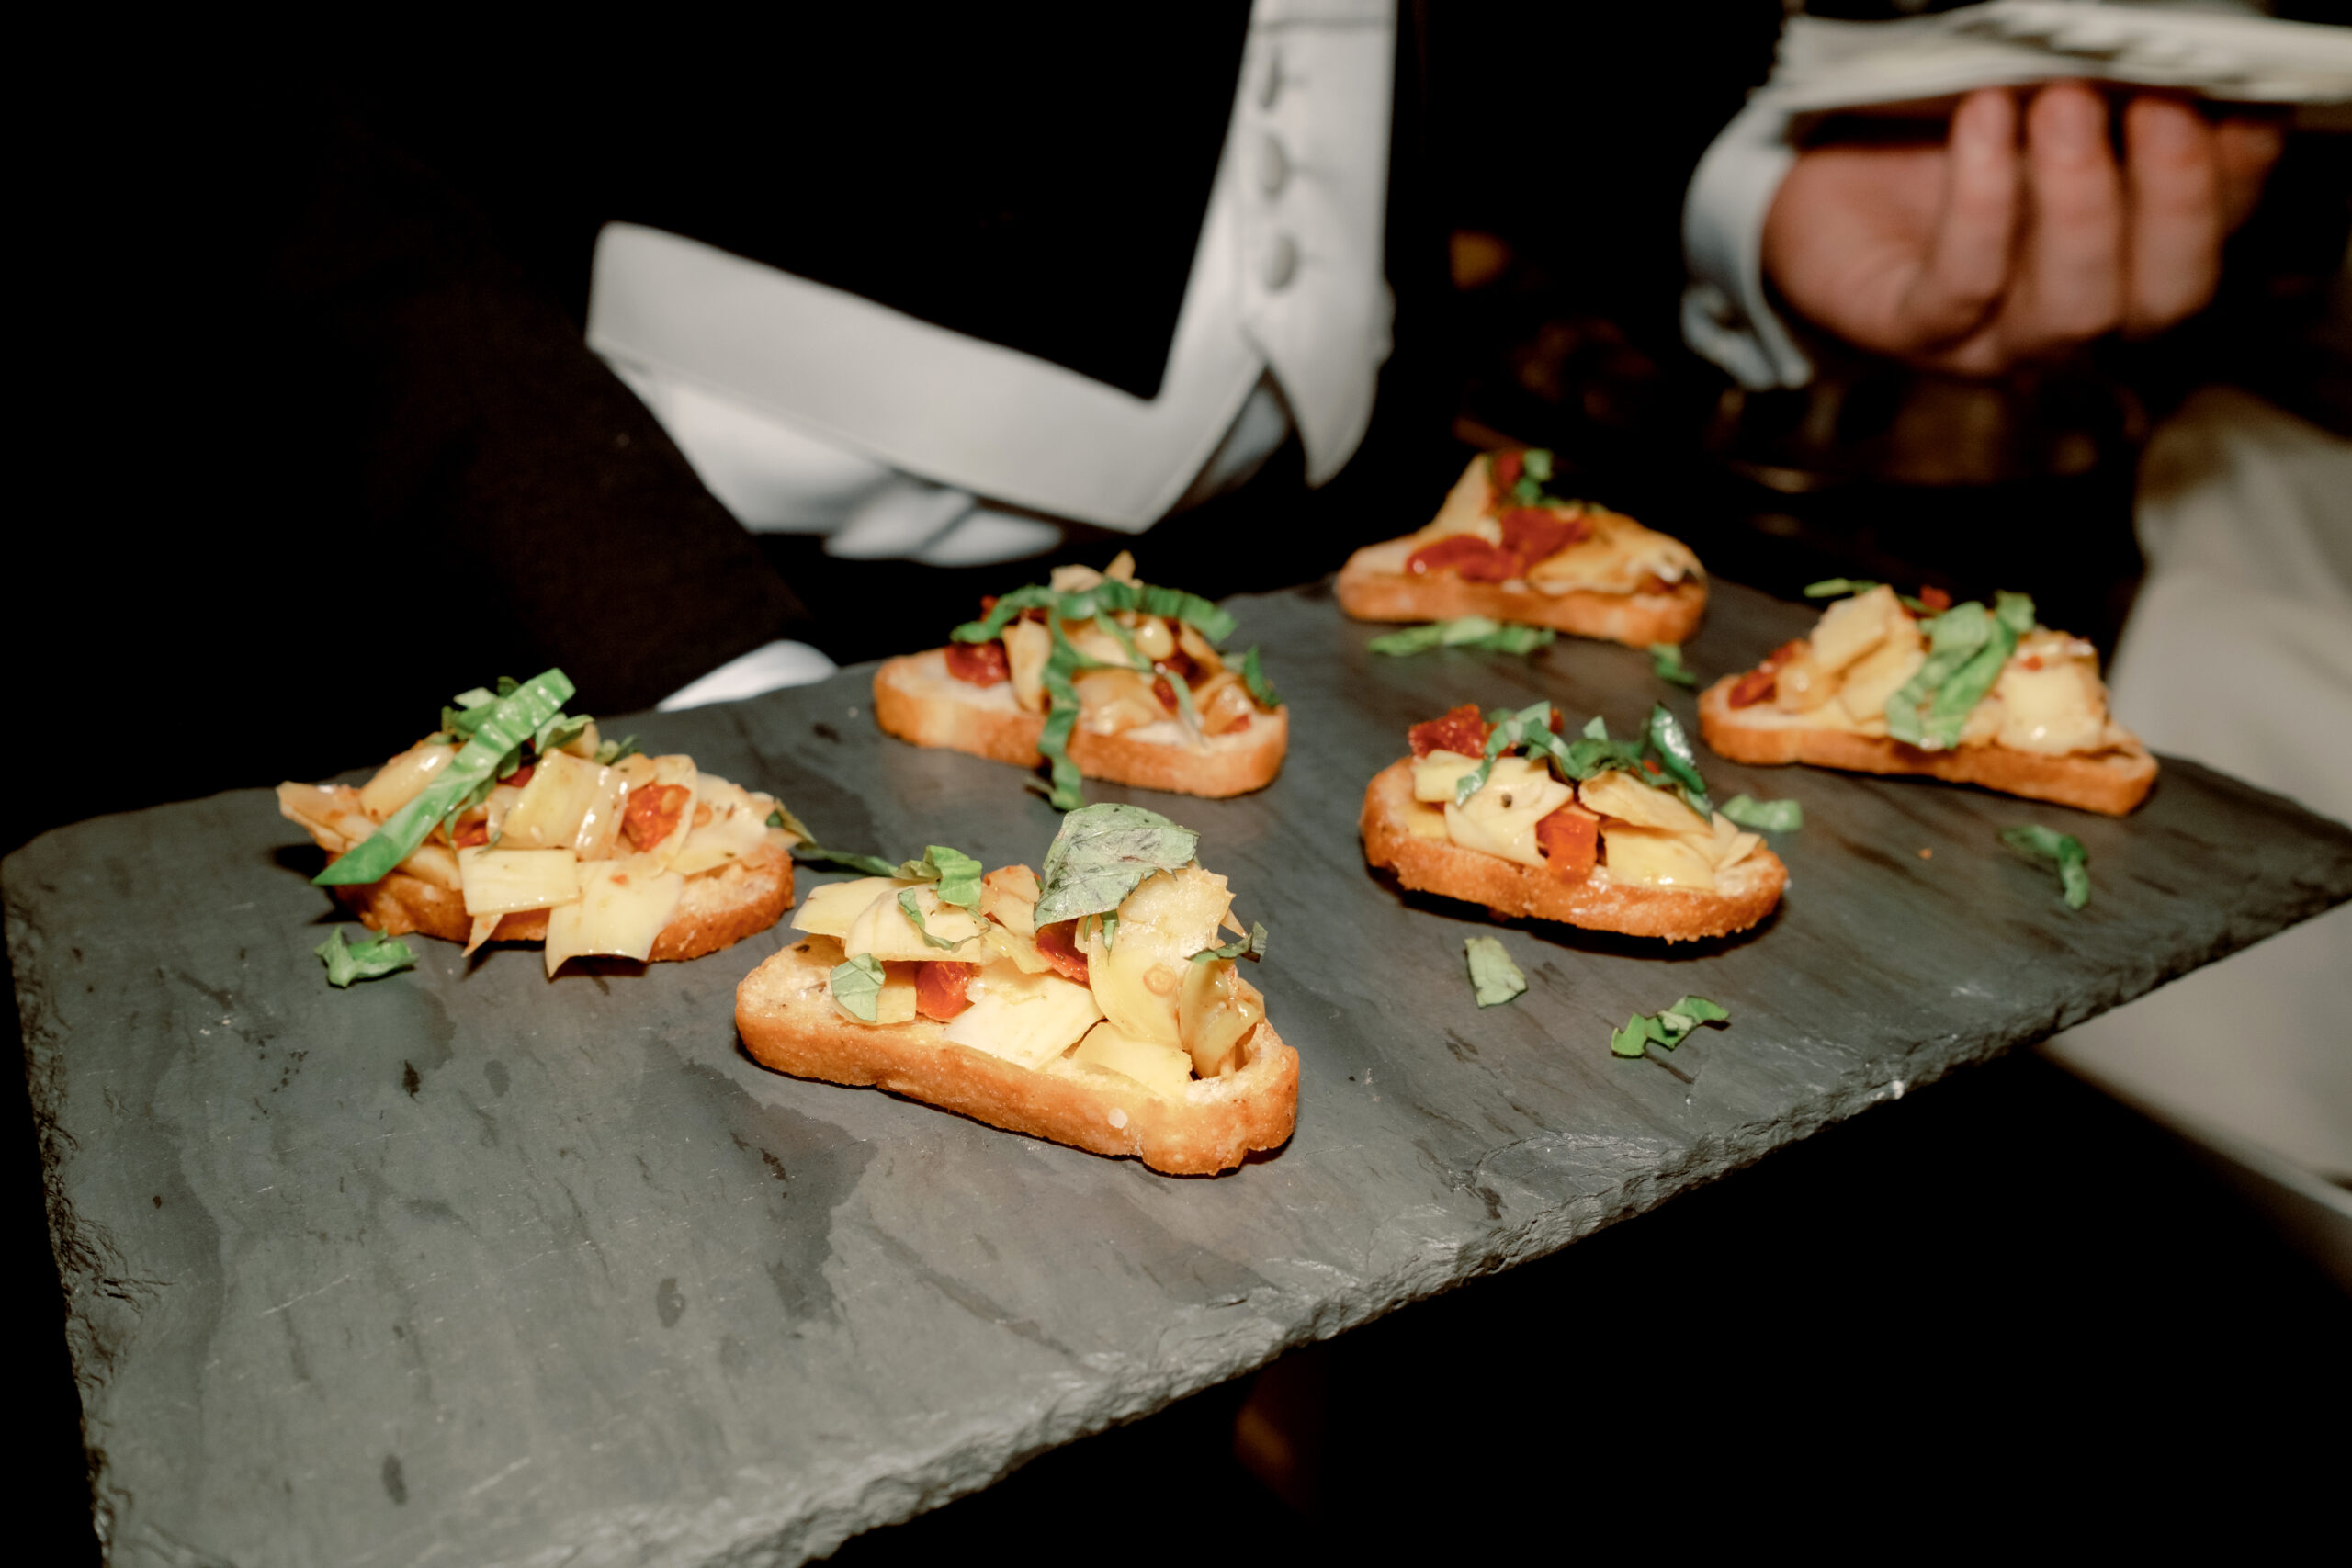 Canapes at a wedding reception. Image by Jenny Fu Studio